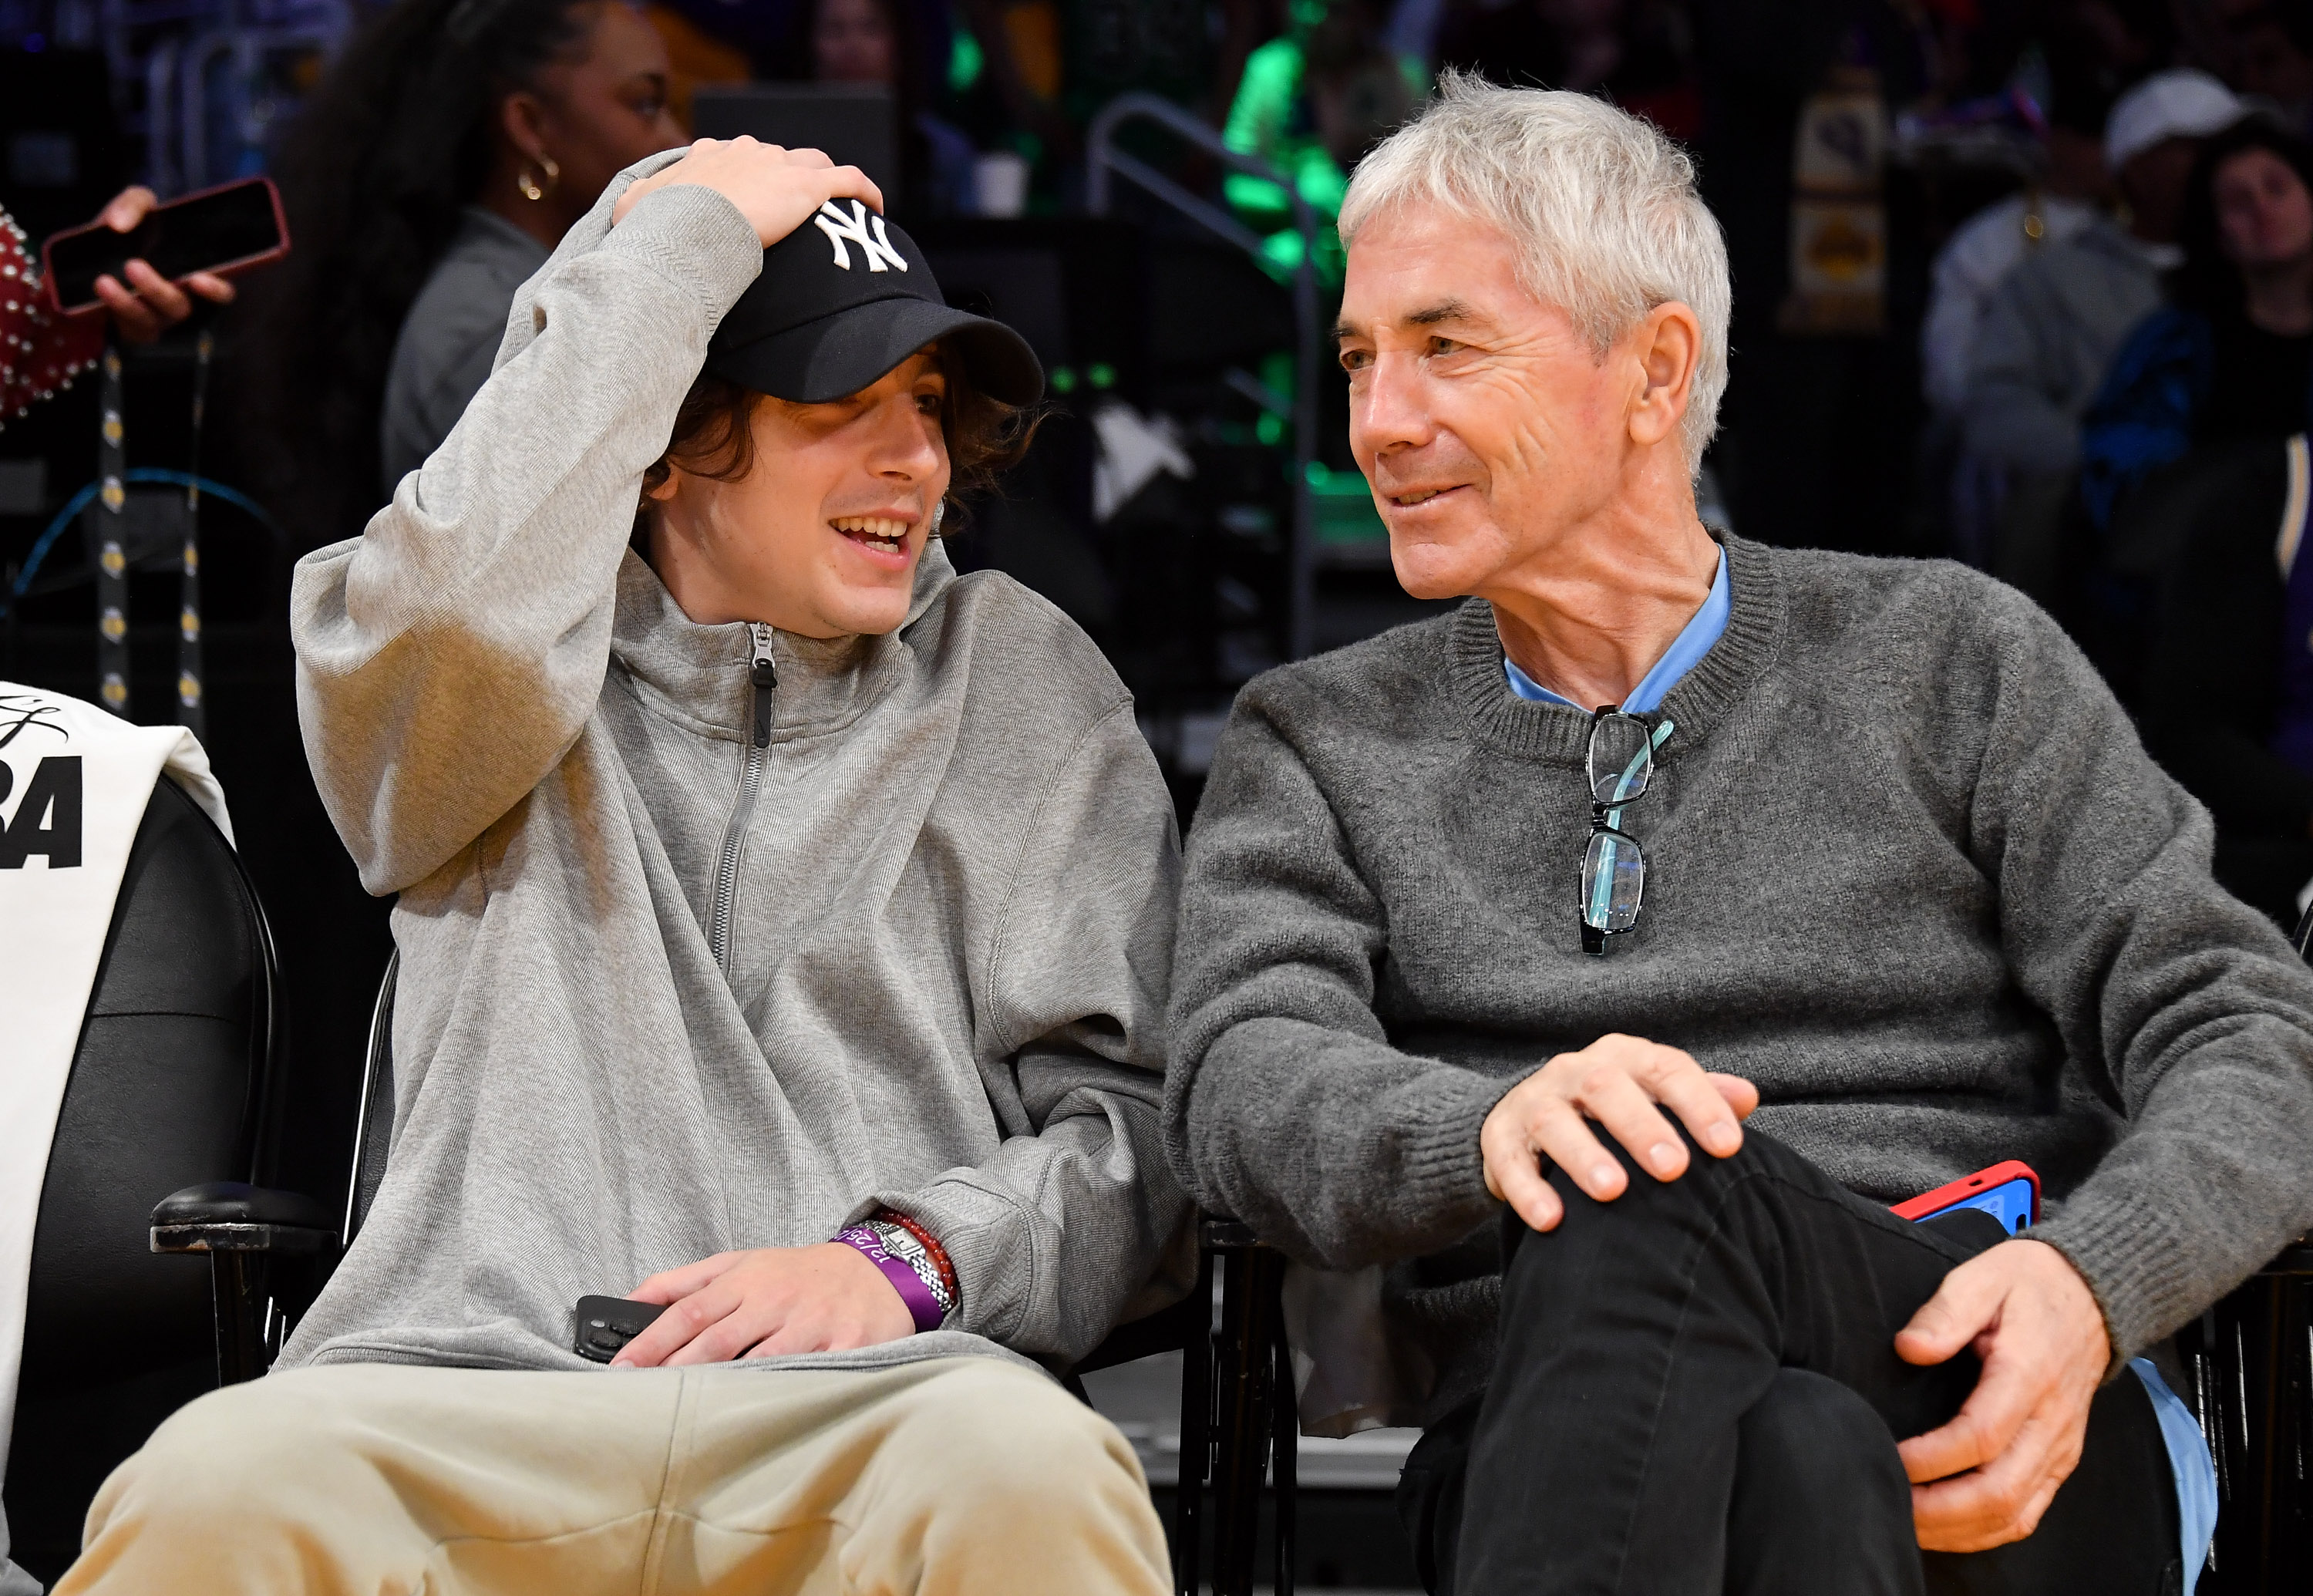 Wonka star Timothee Chalamet had a lads' trip with dad Marc on Christmas to see the Los Angeles Lakers get beaten by the Boston Celtics